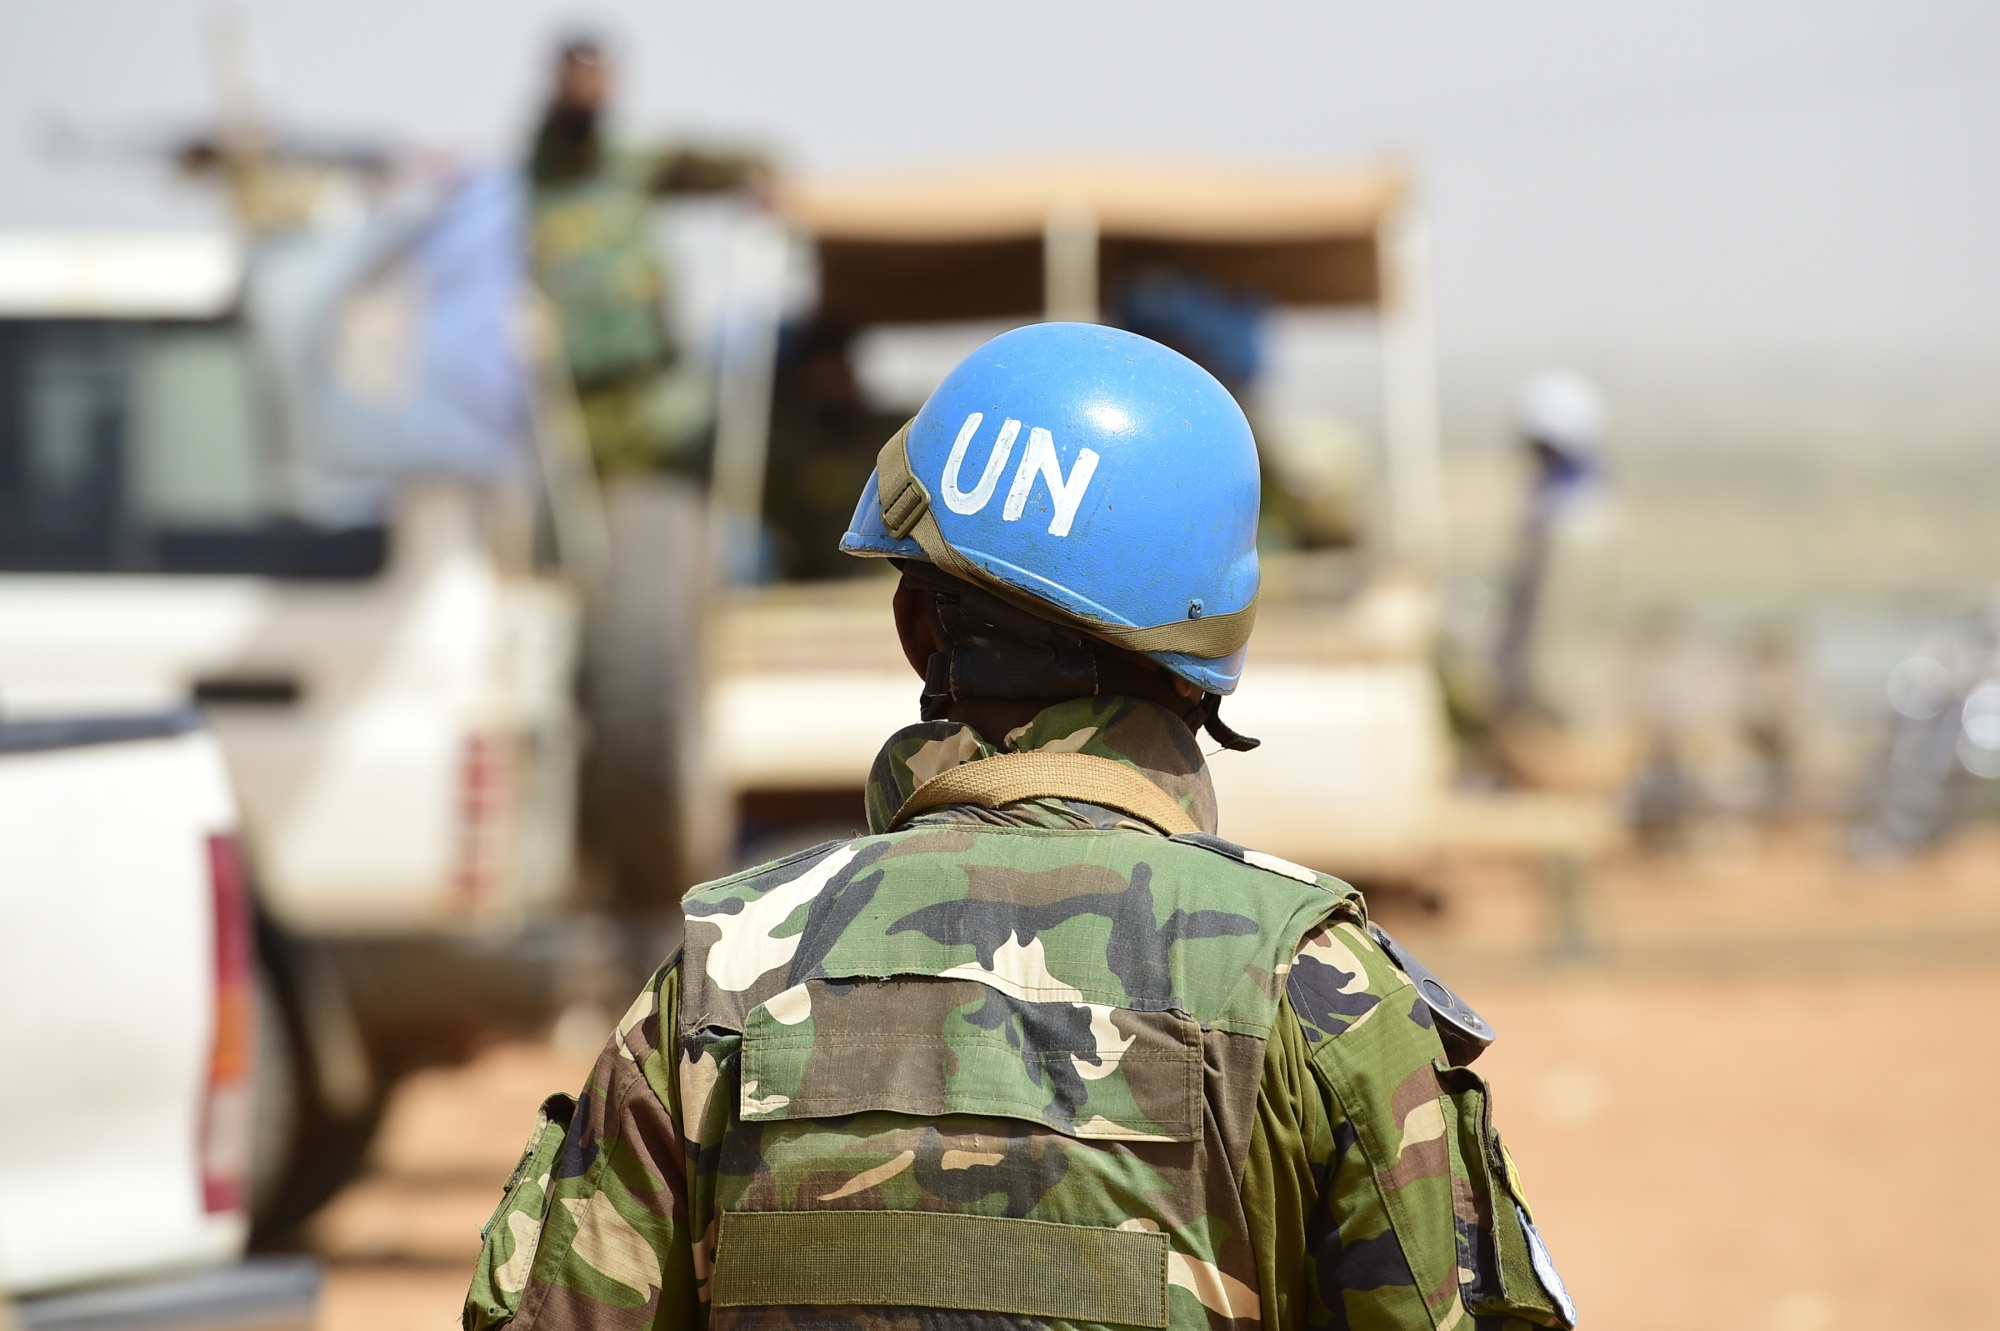 UN Ends Mali Peacekeeping Mission With Wagner Set to Fill Void